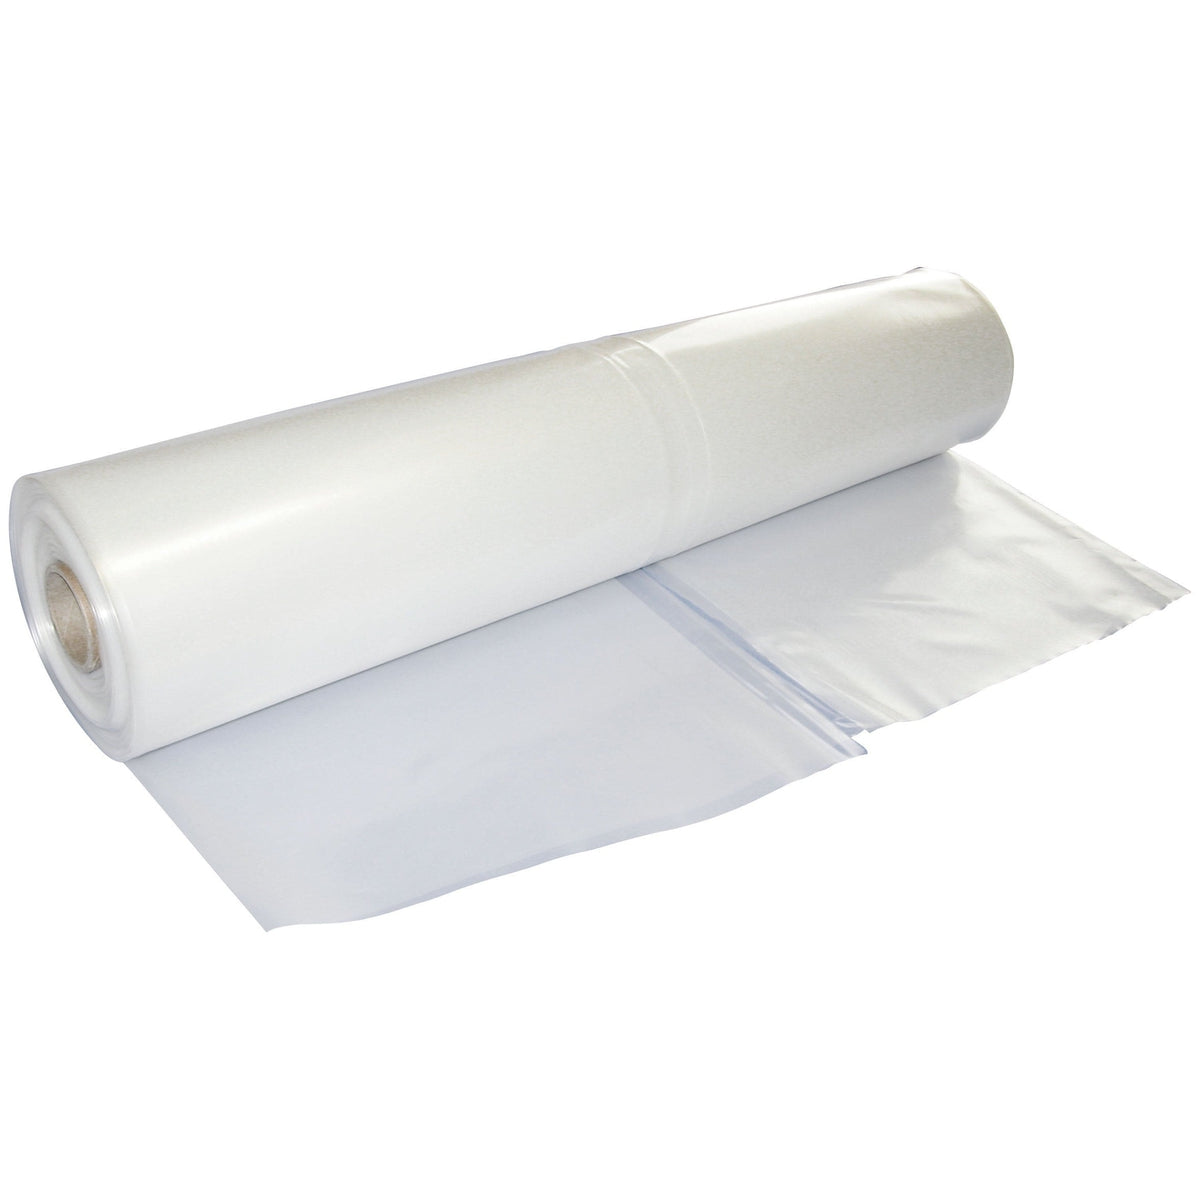 Dr. Shrink Not Qualified for Free Shipping Dr. Shrink Shrink Wrap Clear 32' x 100' 7 Mil #DS-327100C